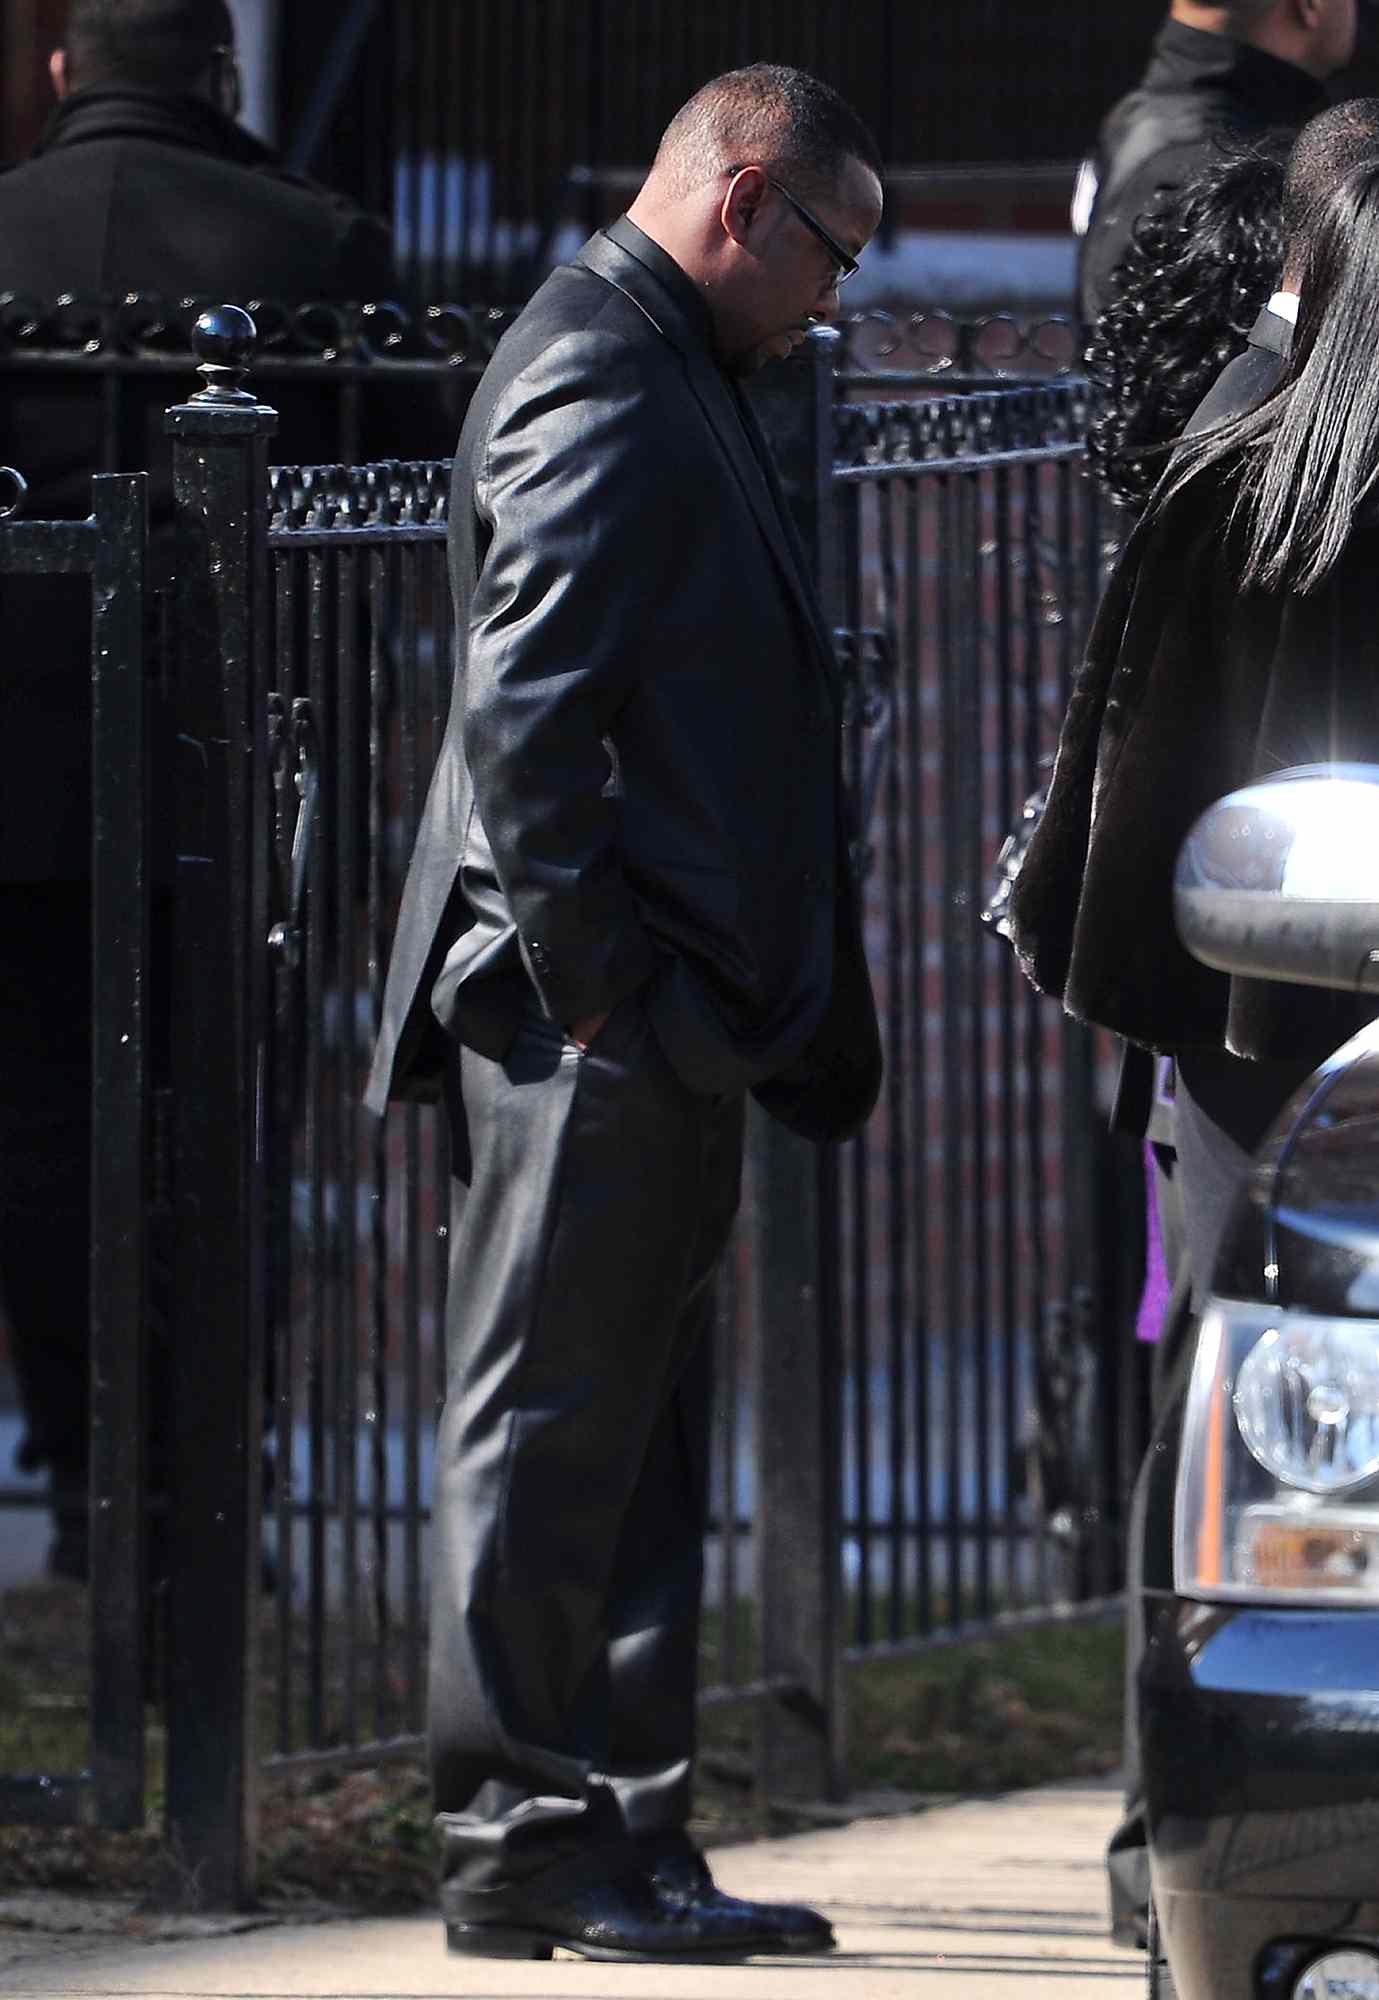 Bobby Brown stands outside of the funeral service for Whitney Houston on February 18, 2012 in Newark, New Jersey. Whitney Houston was found dead in her hotel room at The Beverly Hilton hotel on February 11, 2012